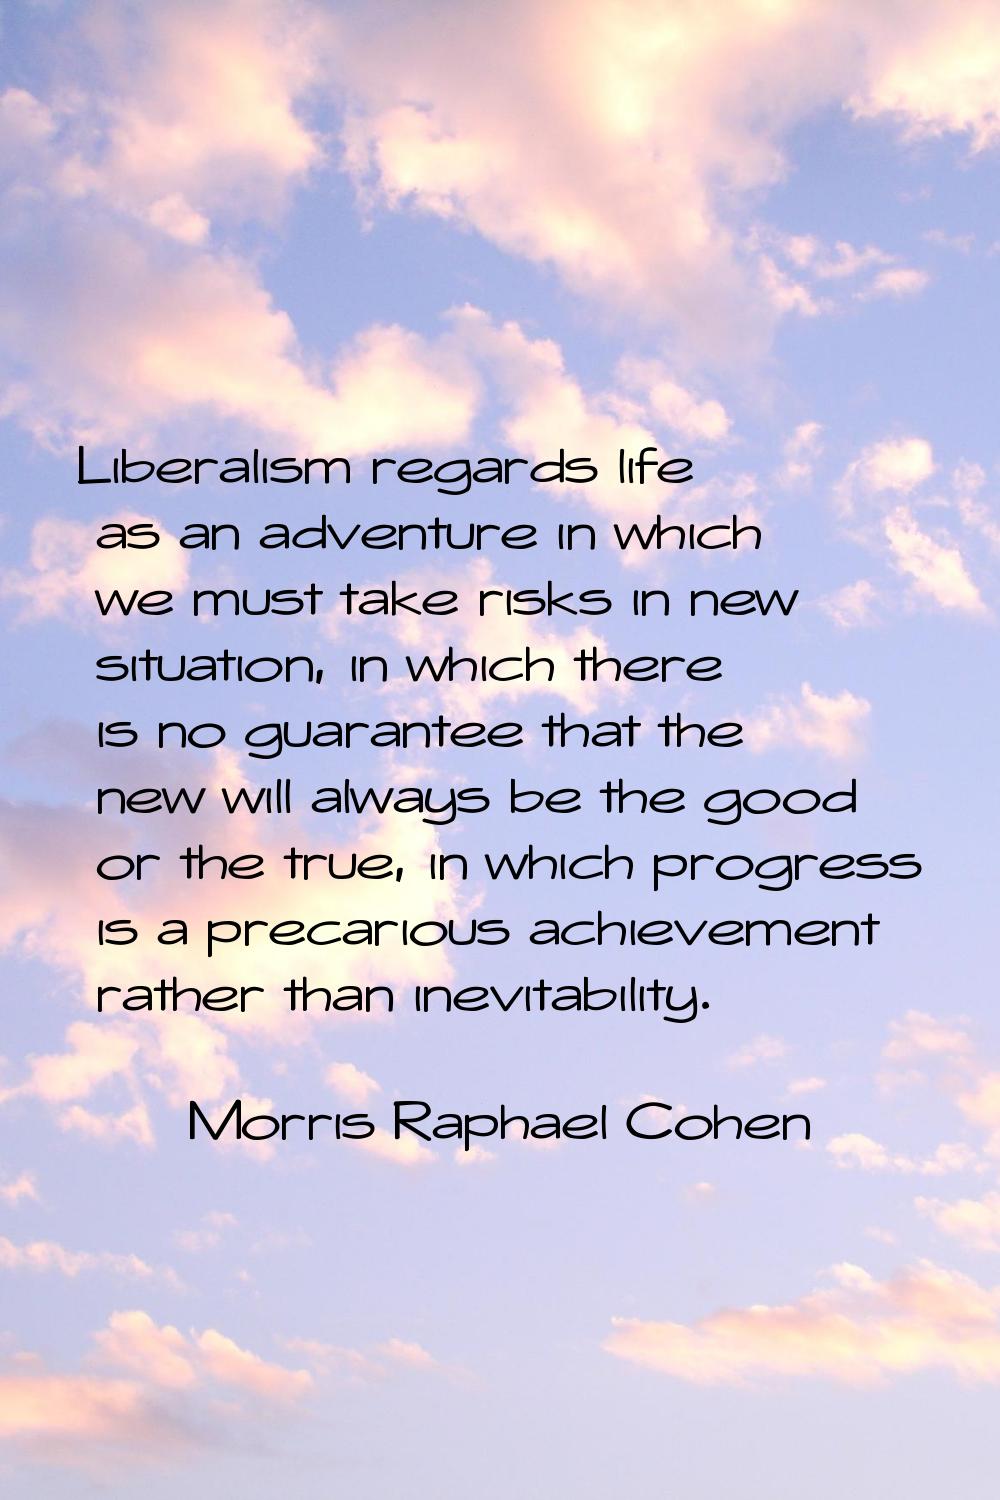 Liberalism regards life as an adventure in which we must take risks in new situation, in which ther